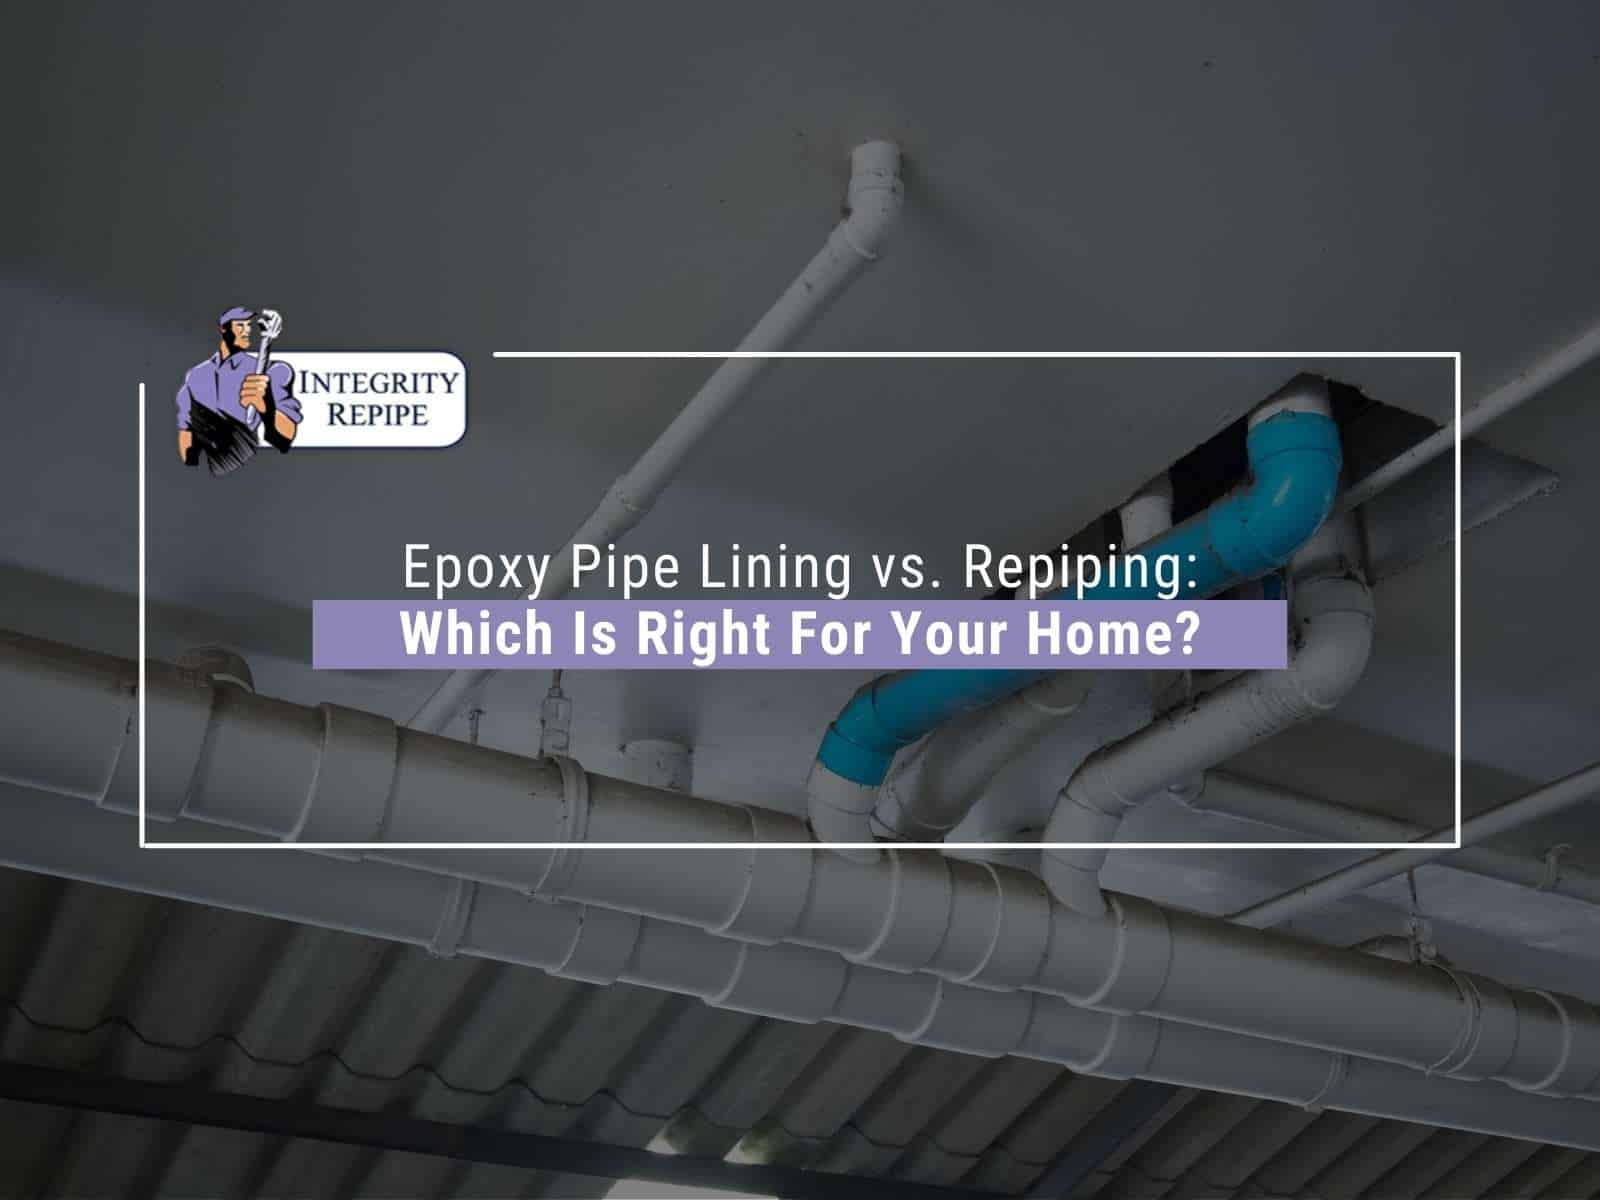 Epoxy Pipe Lining vs. Repiping Which Is Right For Your Home